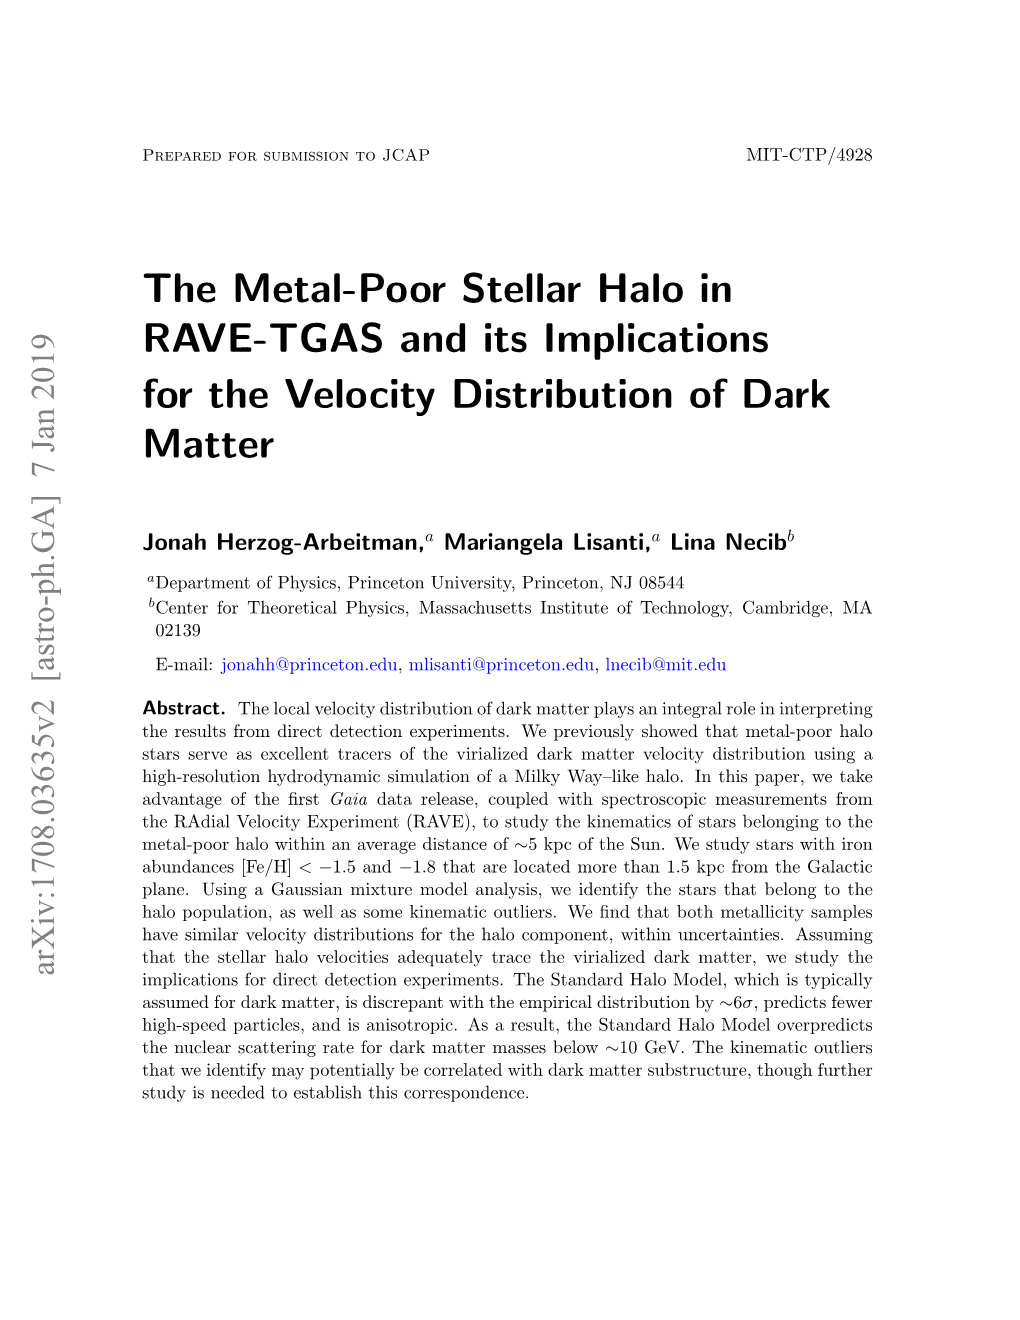 The Metal-Poor Stellar Halo in RAVE-TGAS and Its Implications for the Velocity Distribution of Dark Matter